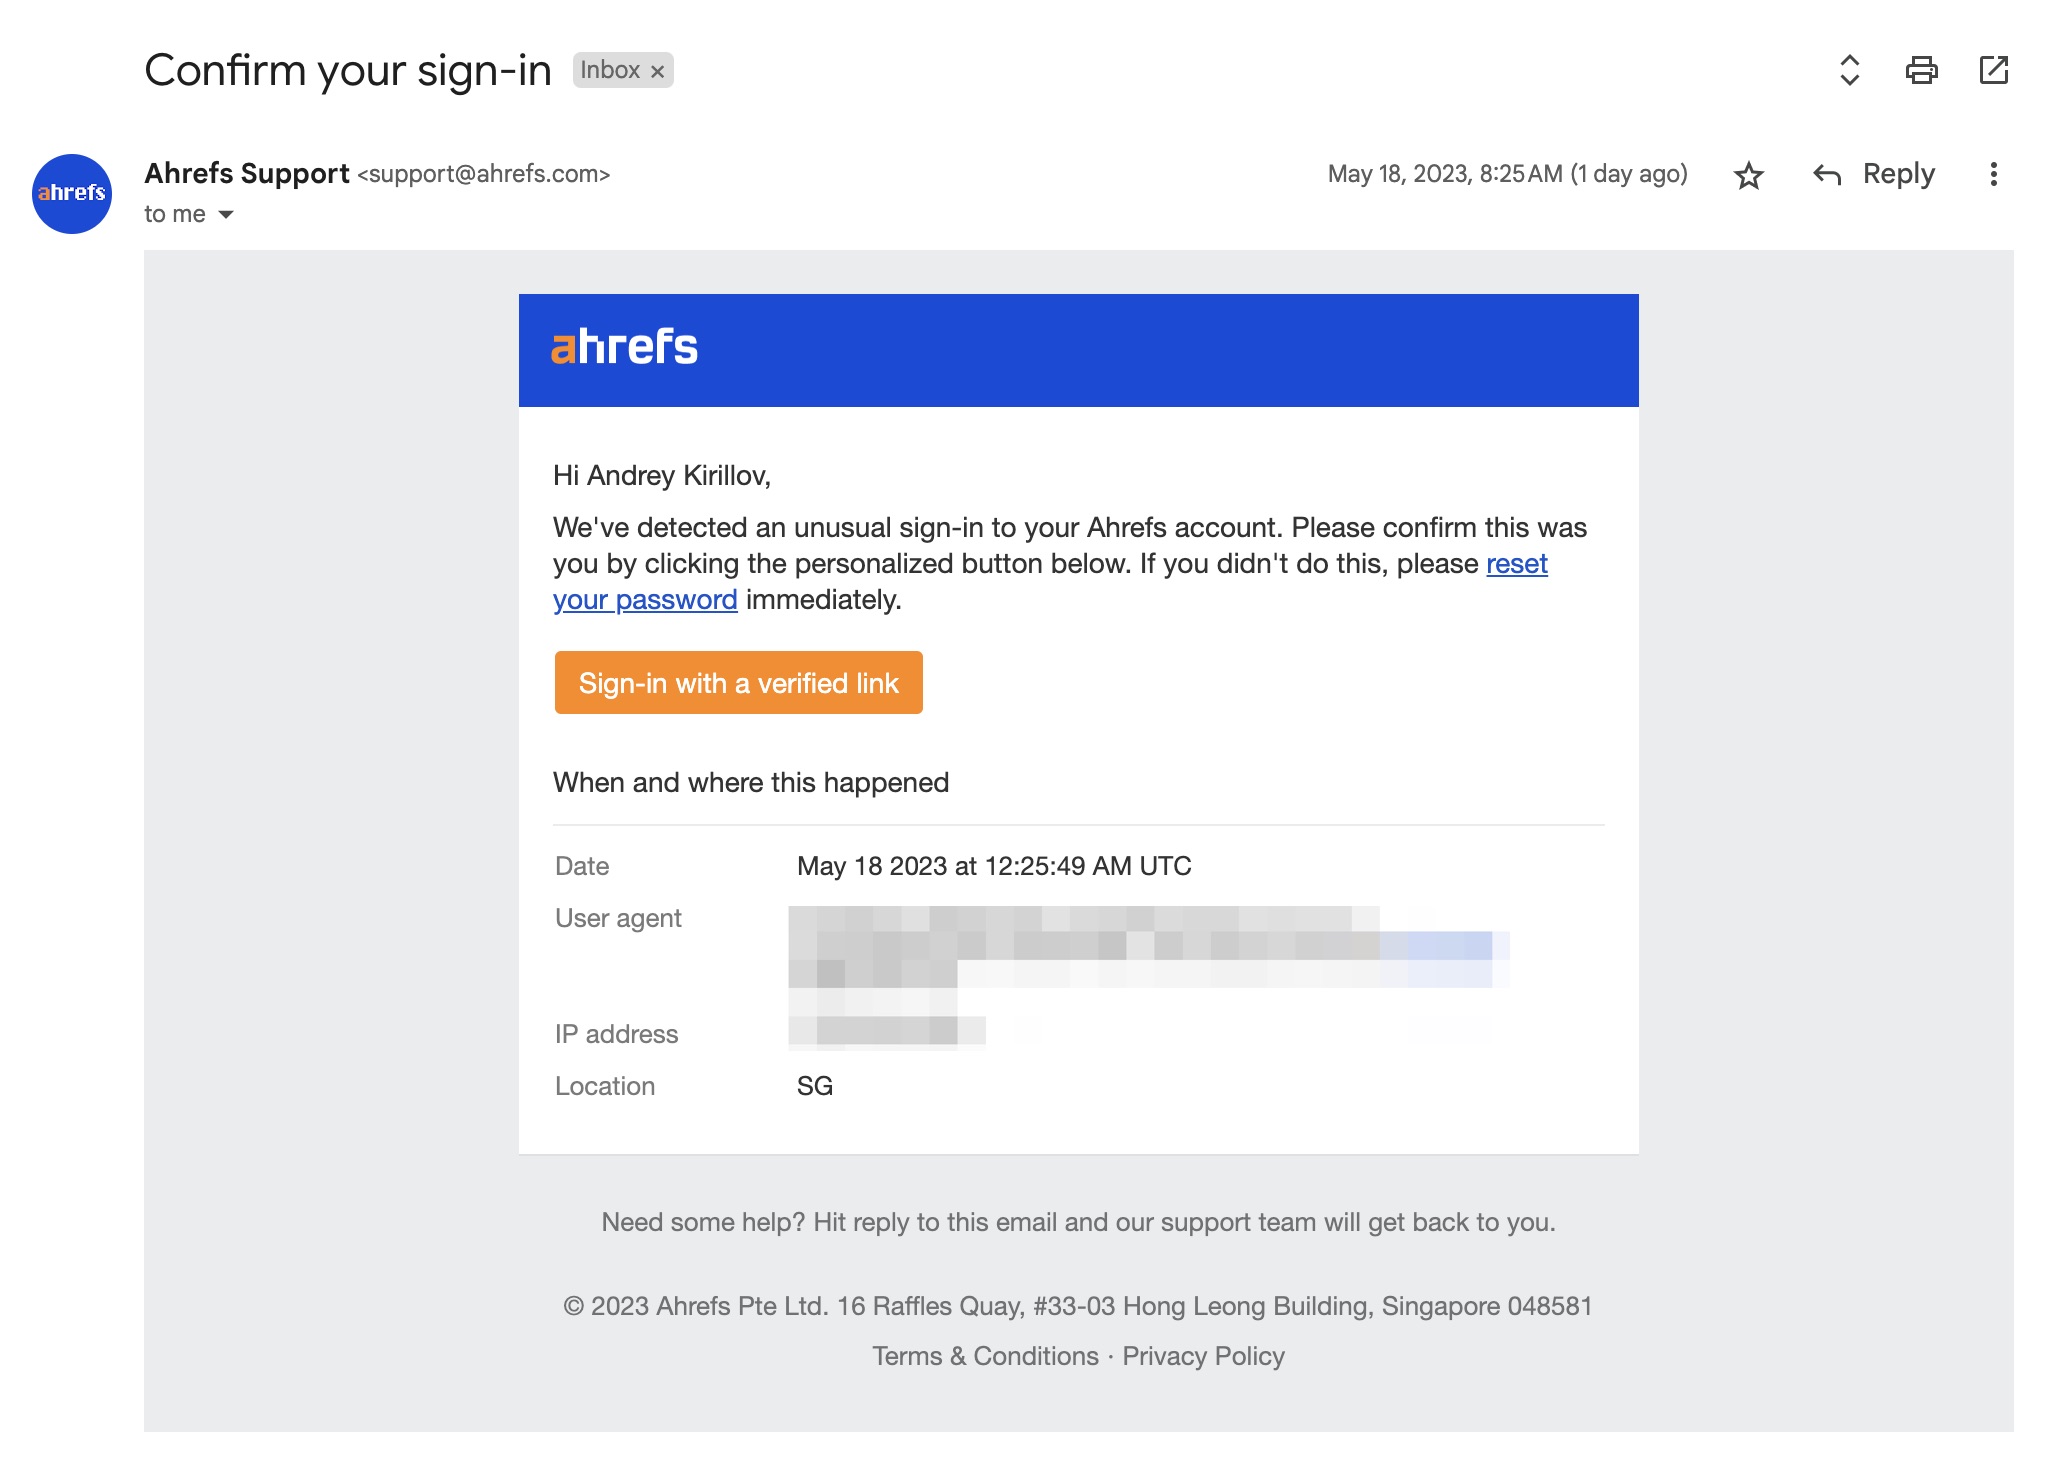 Confirmation link in new sign-in email notification